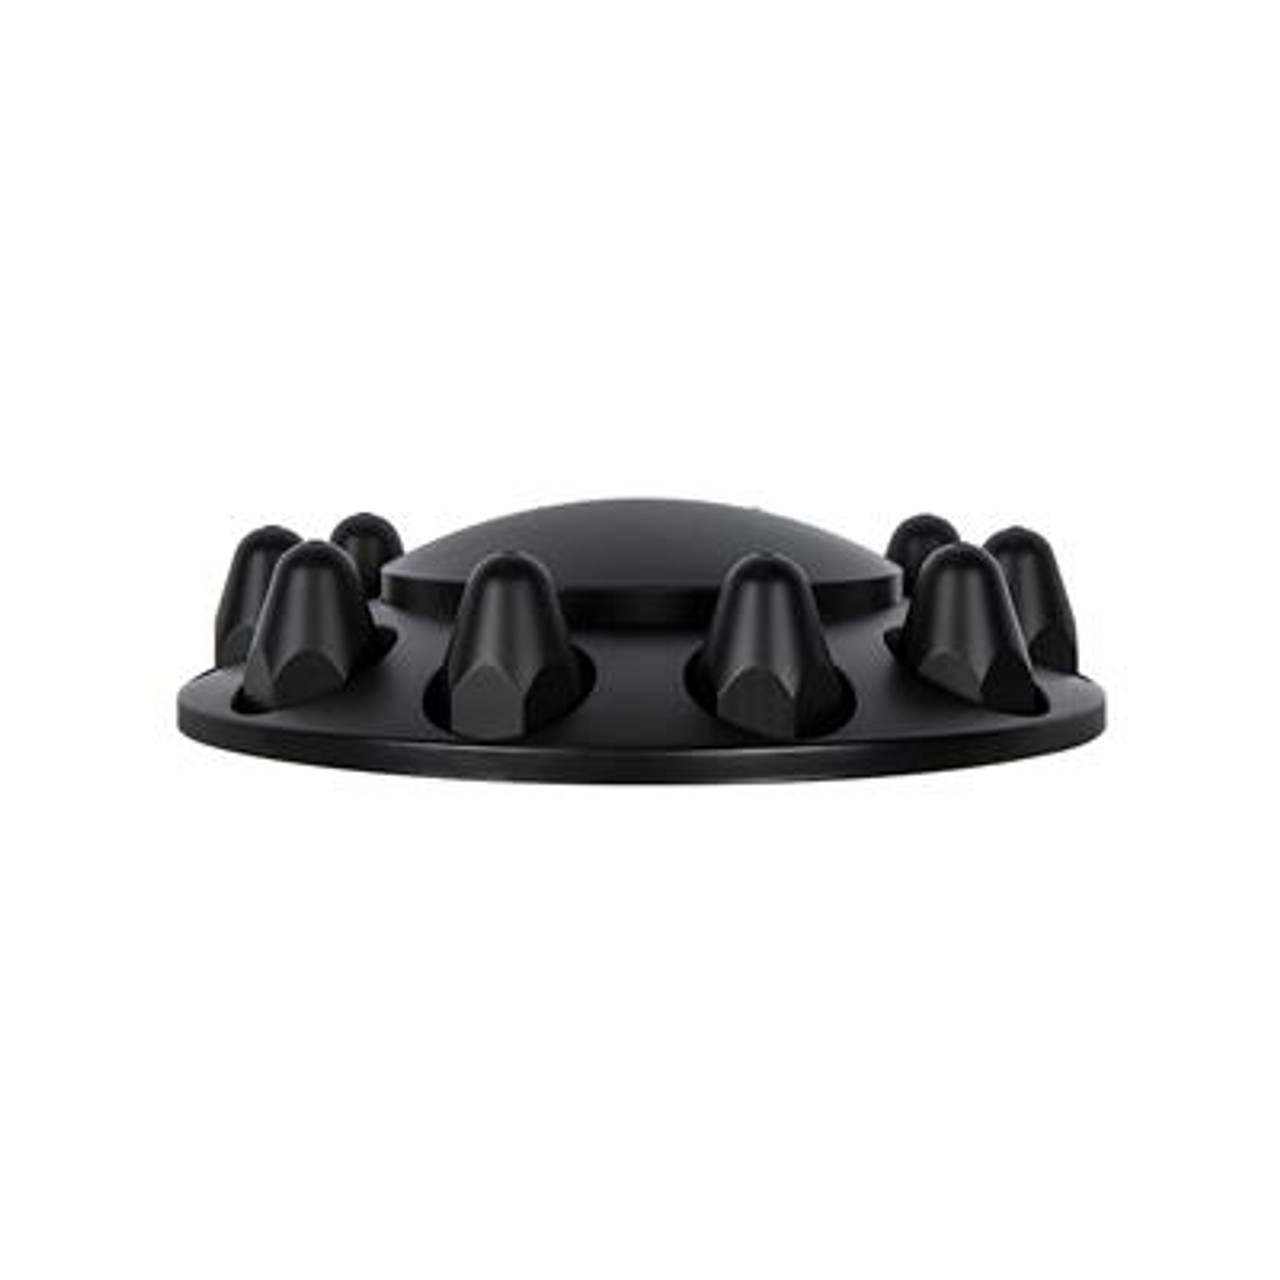 Front Axle Cover With Dome Cap & 1-1/2" Push-On Nut Covers - Matte Black